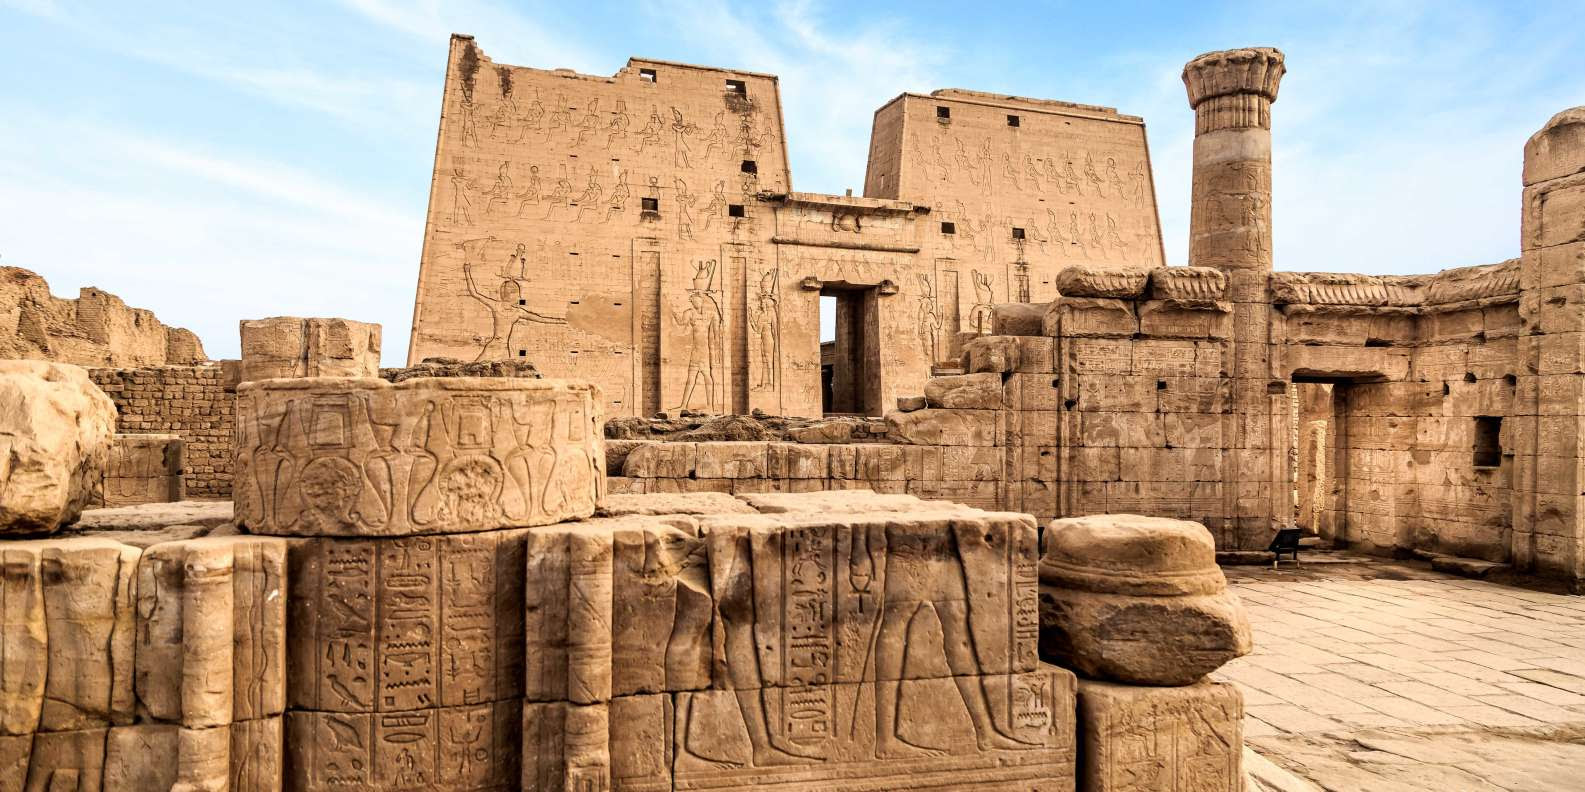 The BEST Edfu Archaeology 2022 - FREE Cancellation | GetYourGuide